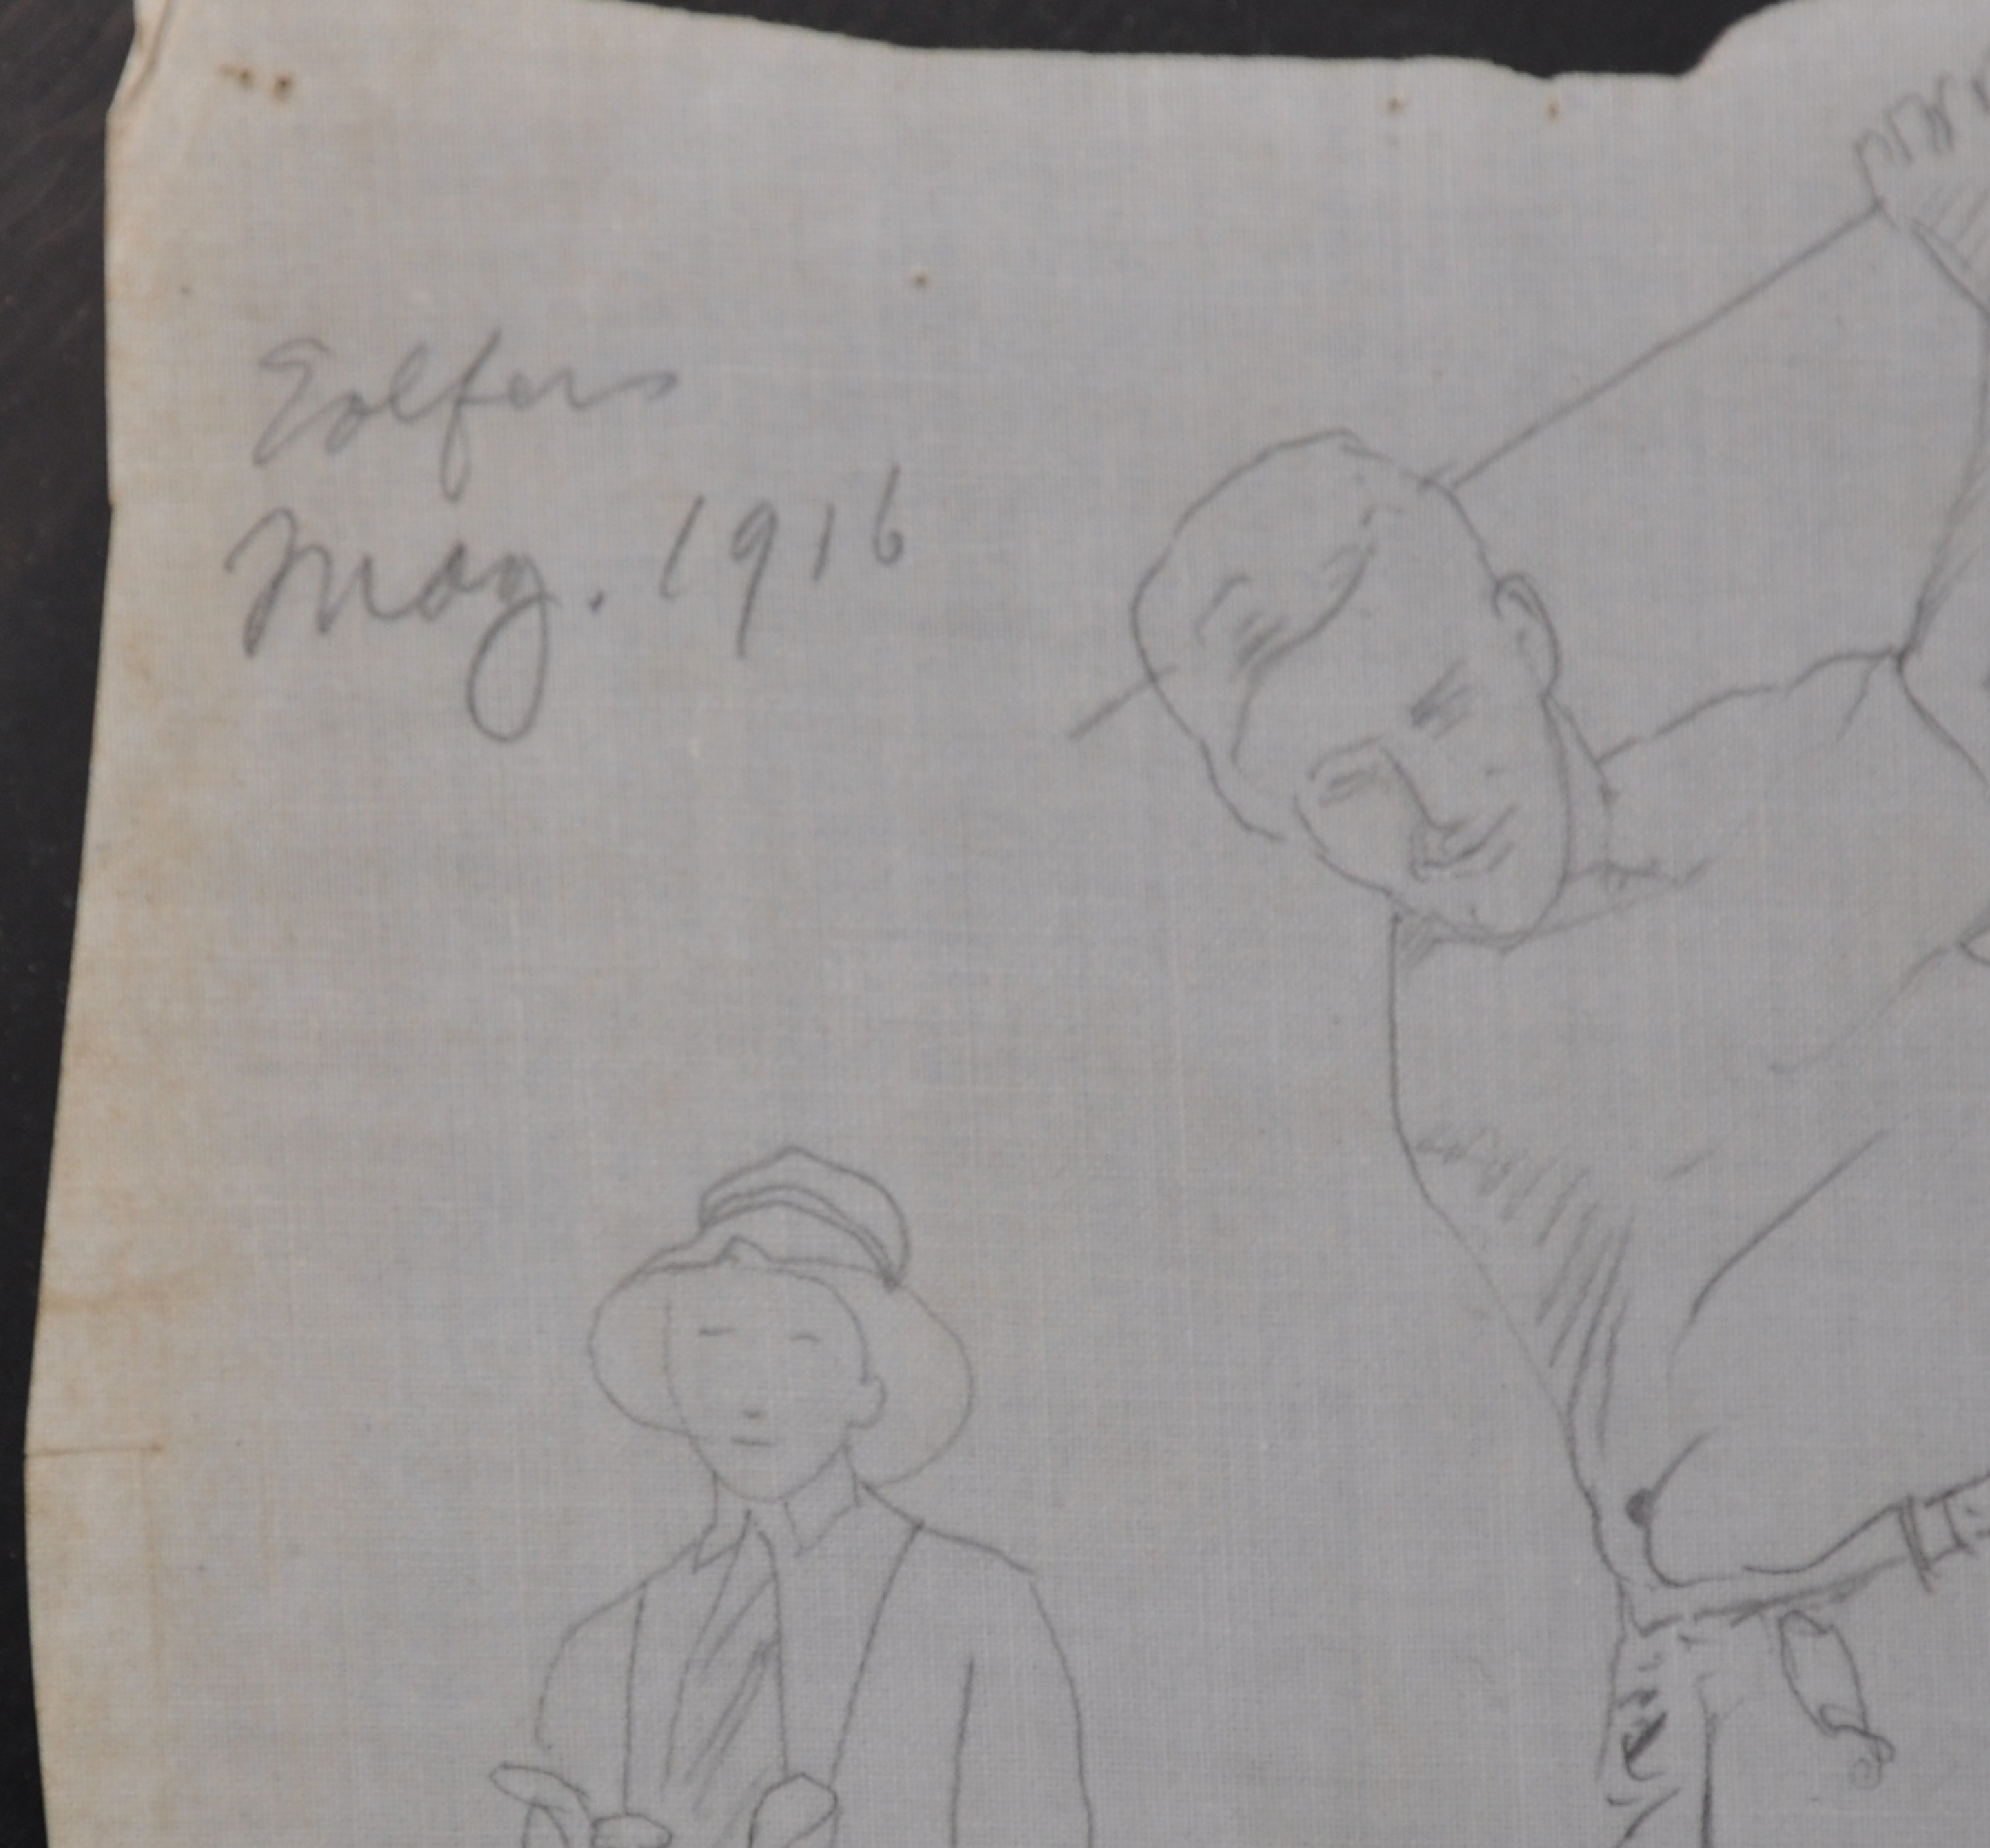 20th Century English School. A Study of a Golfer, Pencil, Inscribed 'Golfers May 1916', Unframed, 7" - Image 3 of 4